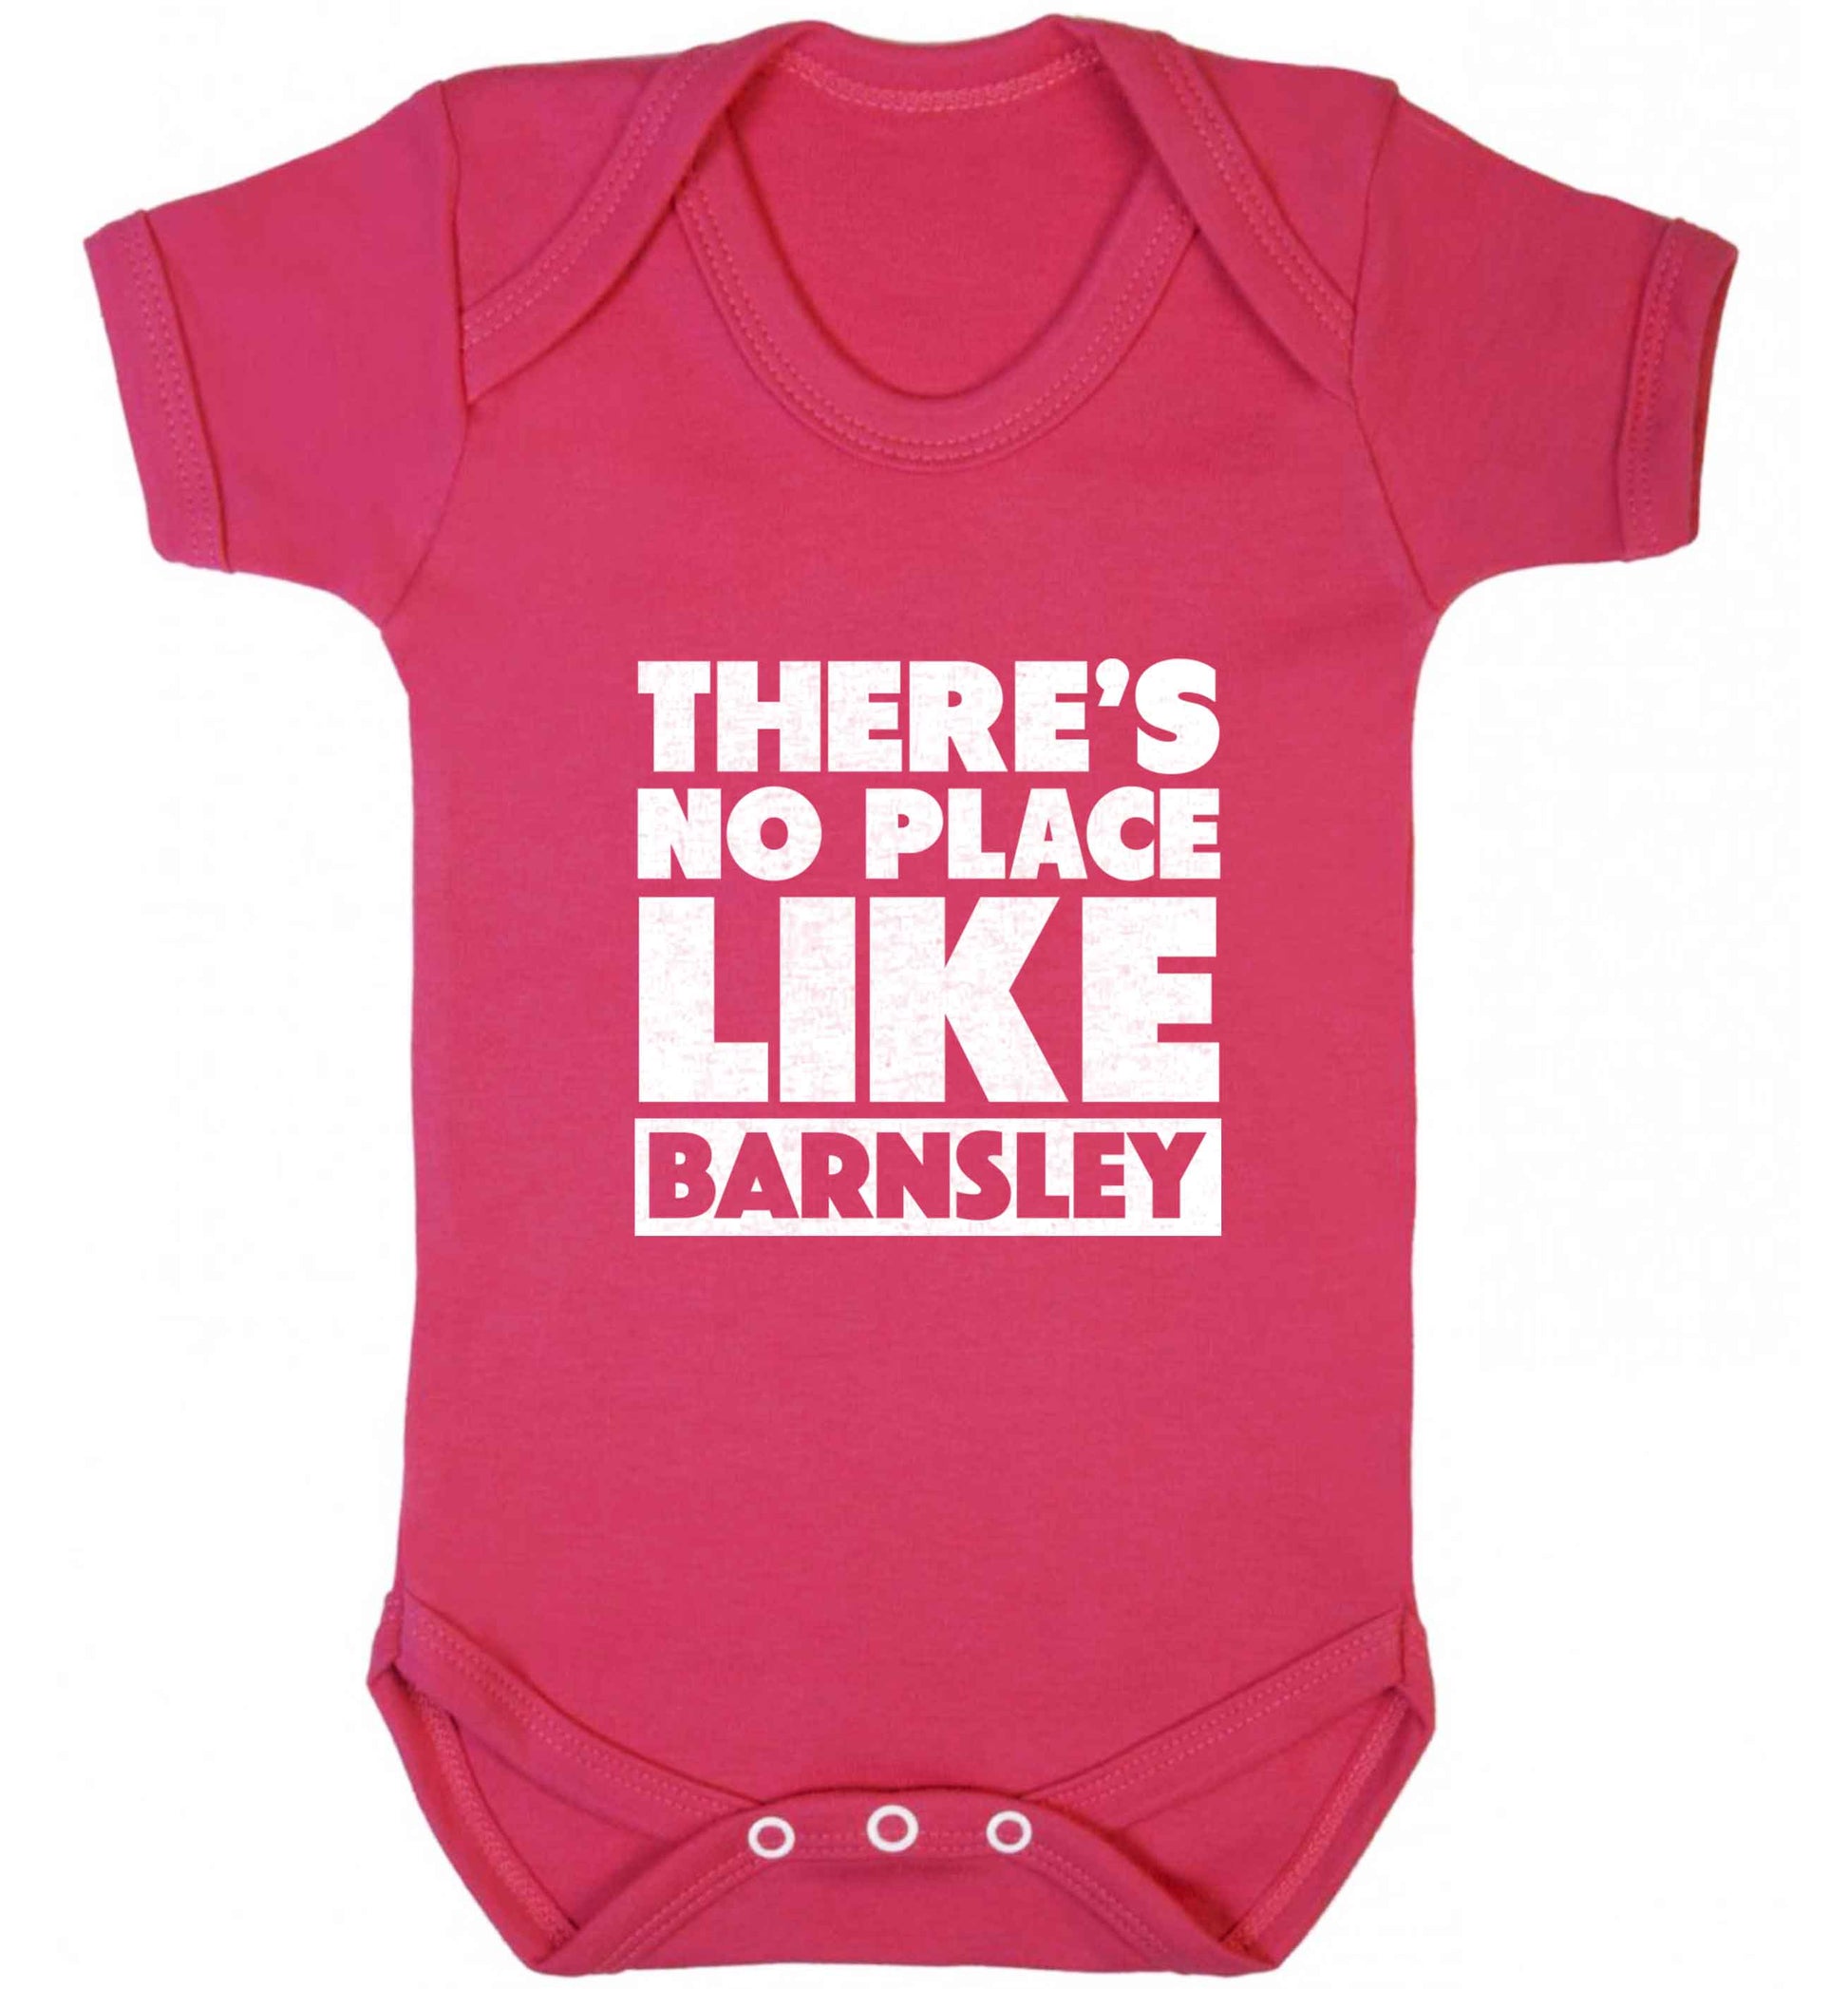 There's No Place Like Barnsley baby vest dark pink 18-24 months